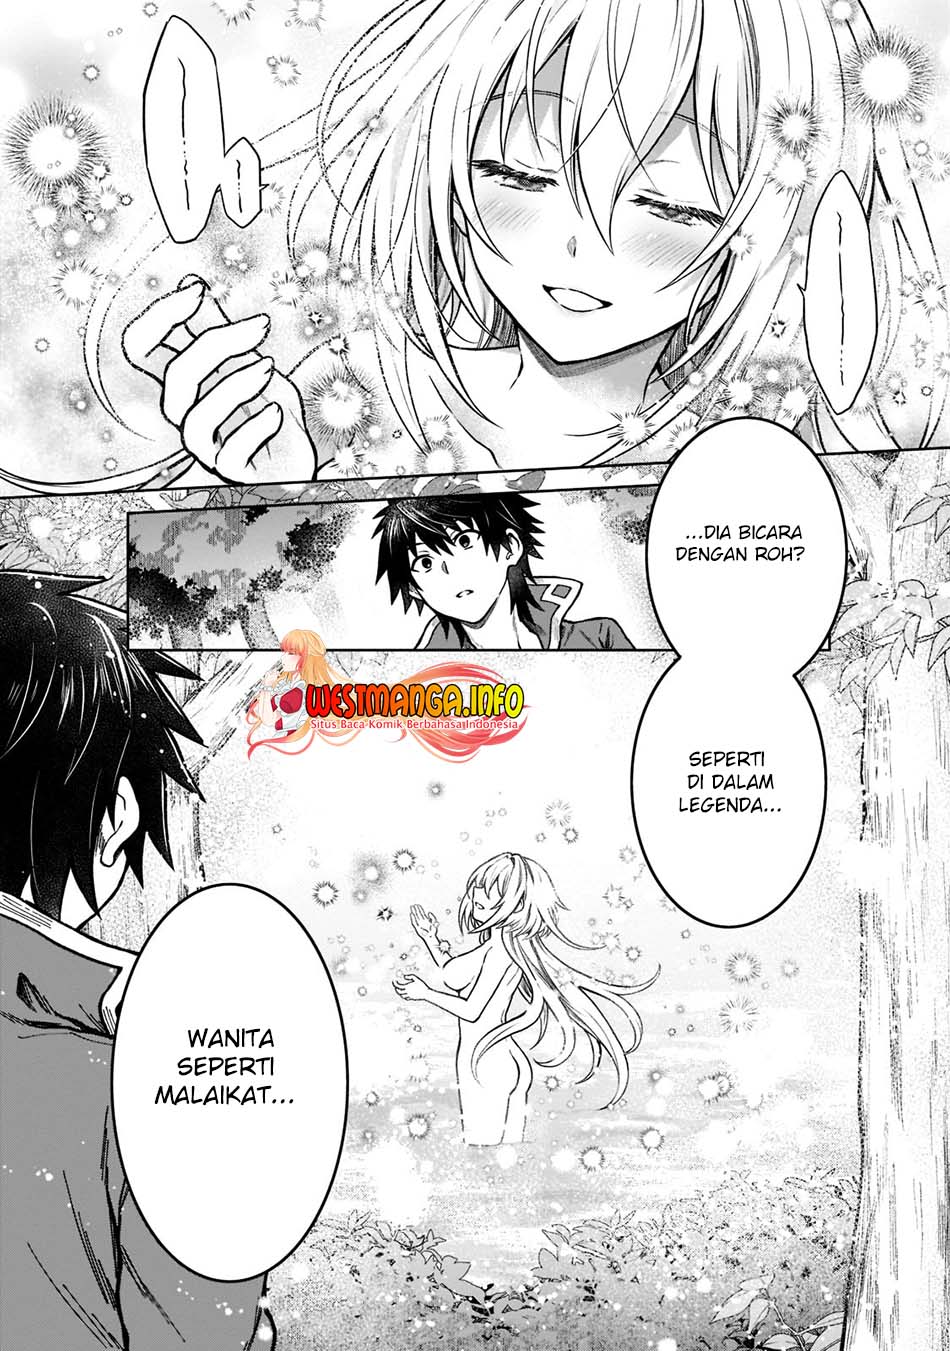 Dilarang COPAS - situs resmi www.mangacanblog.com - Komik d rank adventurer invited by a brave party and the stalking princess 008 - chapter 8 9 Indonesia d rank adventurer invited by a brave party and the stalking princess 008 - chapter 8 Terbaru 19|Baca Manga Komik Indonesia|Mangacan